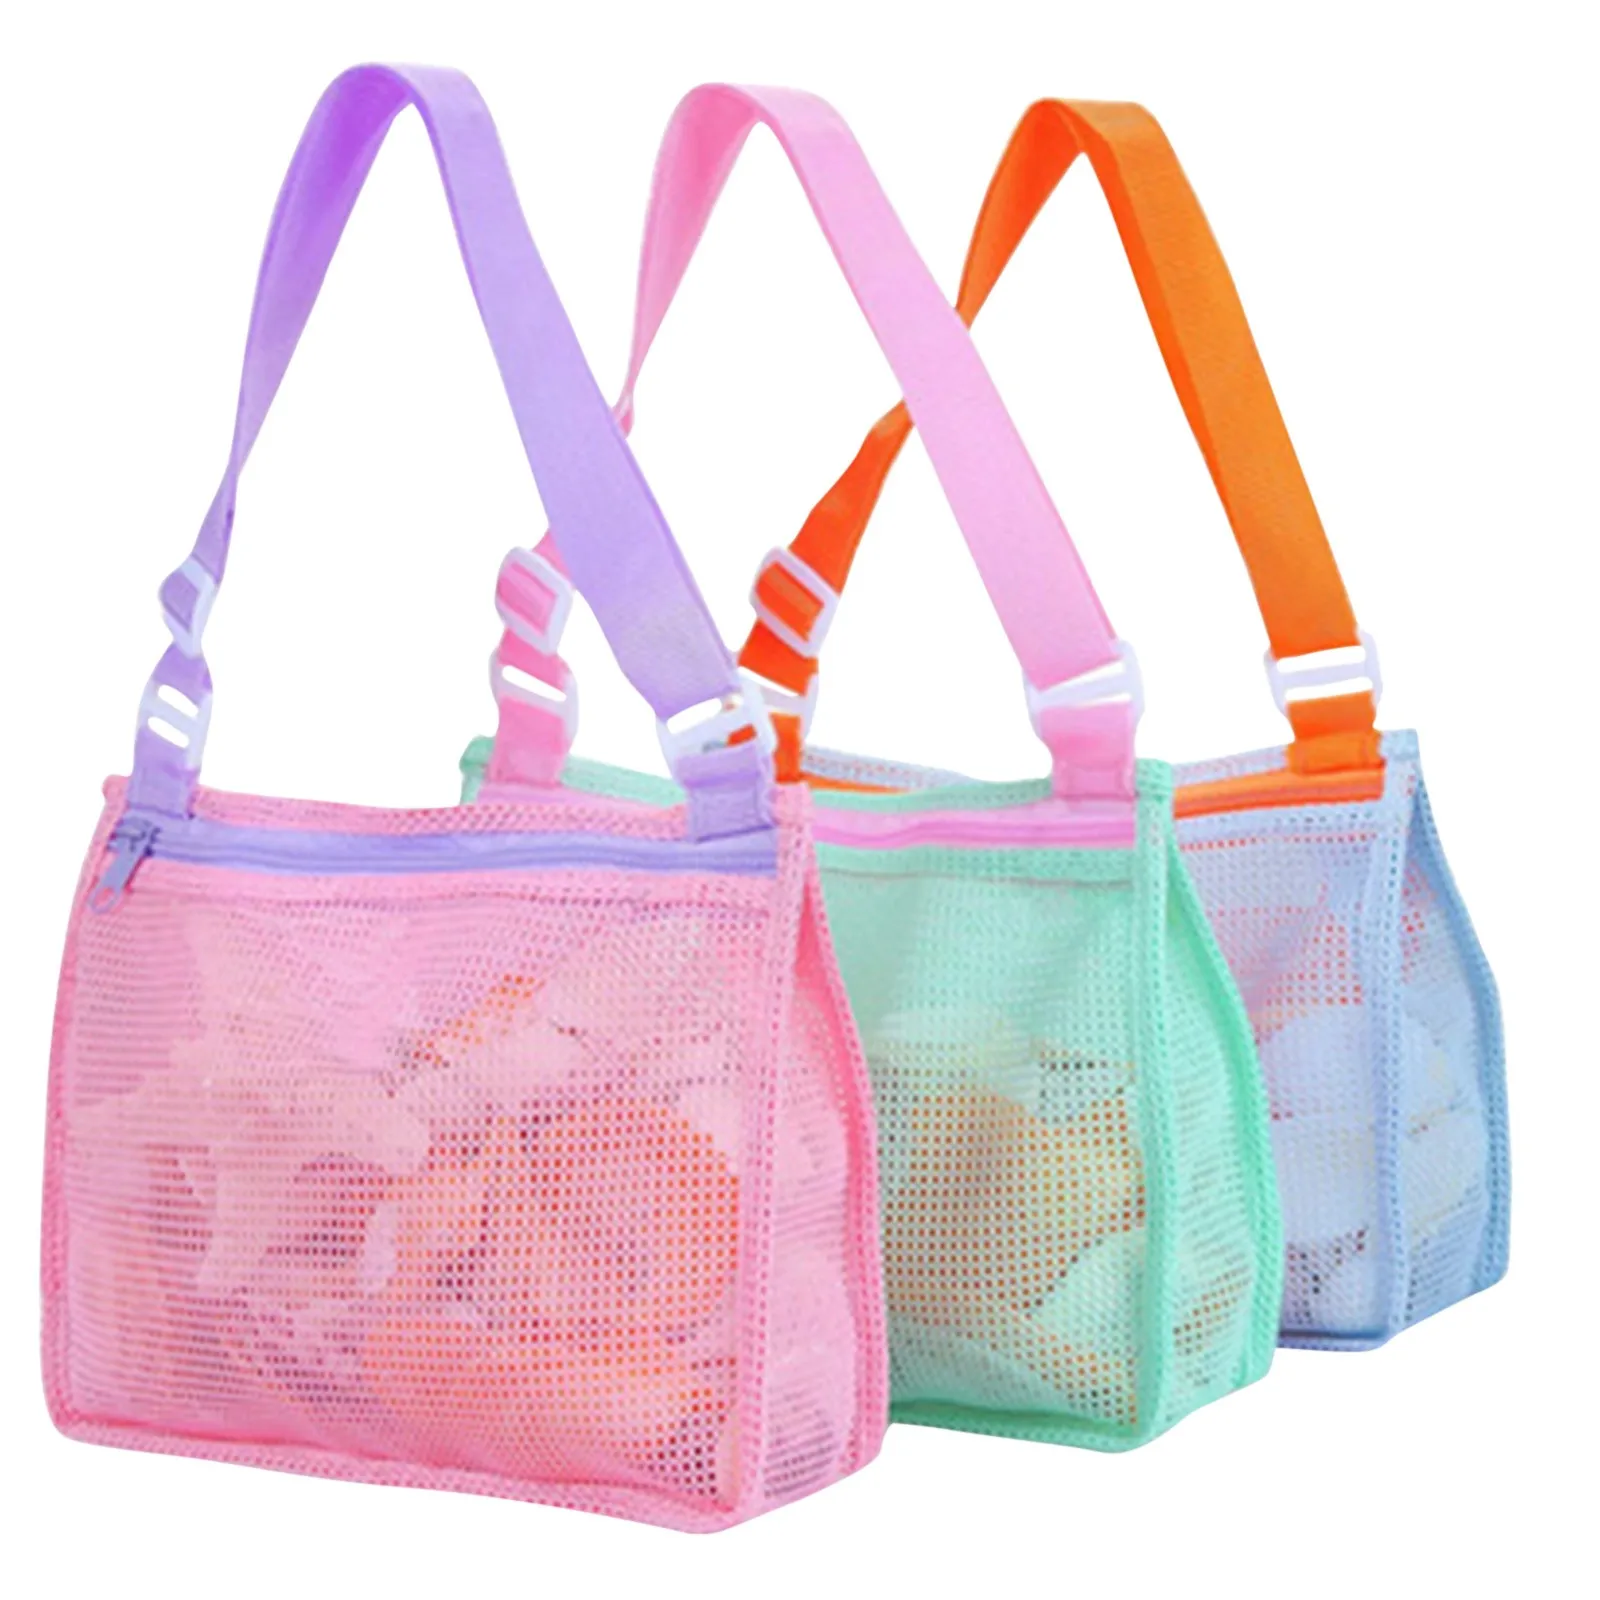 5 Pack Seashell Mesh Bags Childrens Toy Storage Bags Beach Toy Organizer Bags NUOBESTY Mesh Beach Bags 